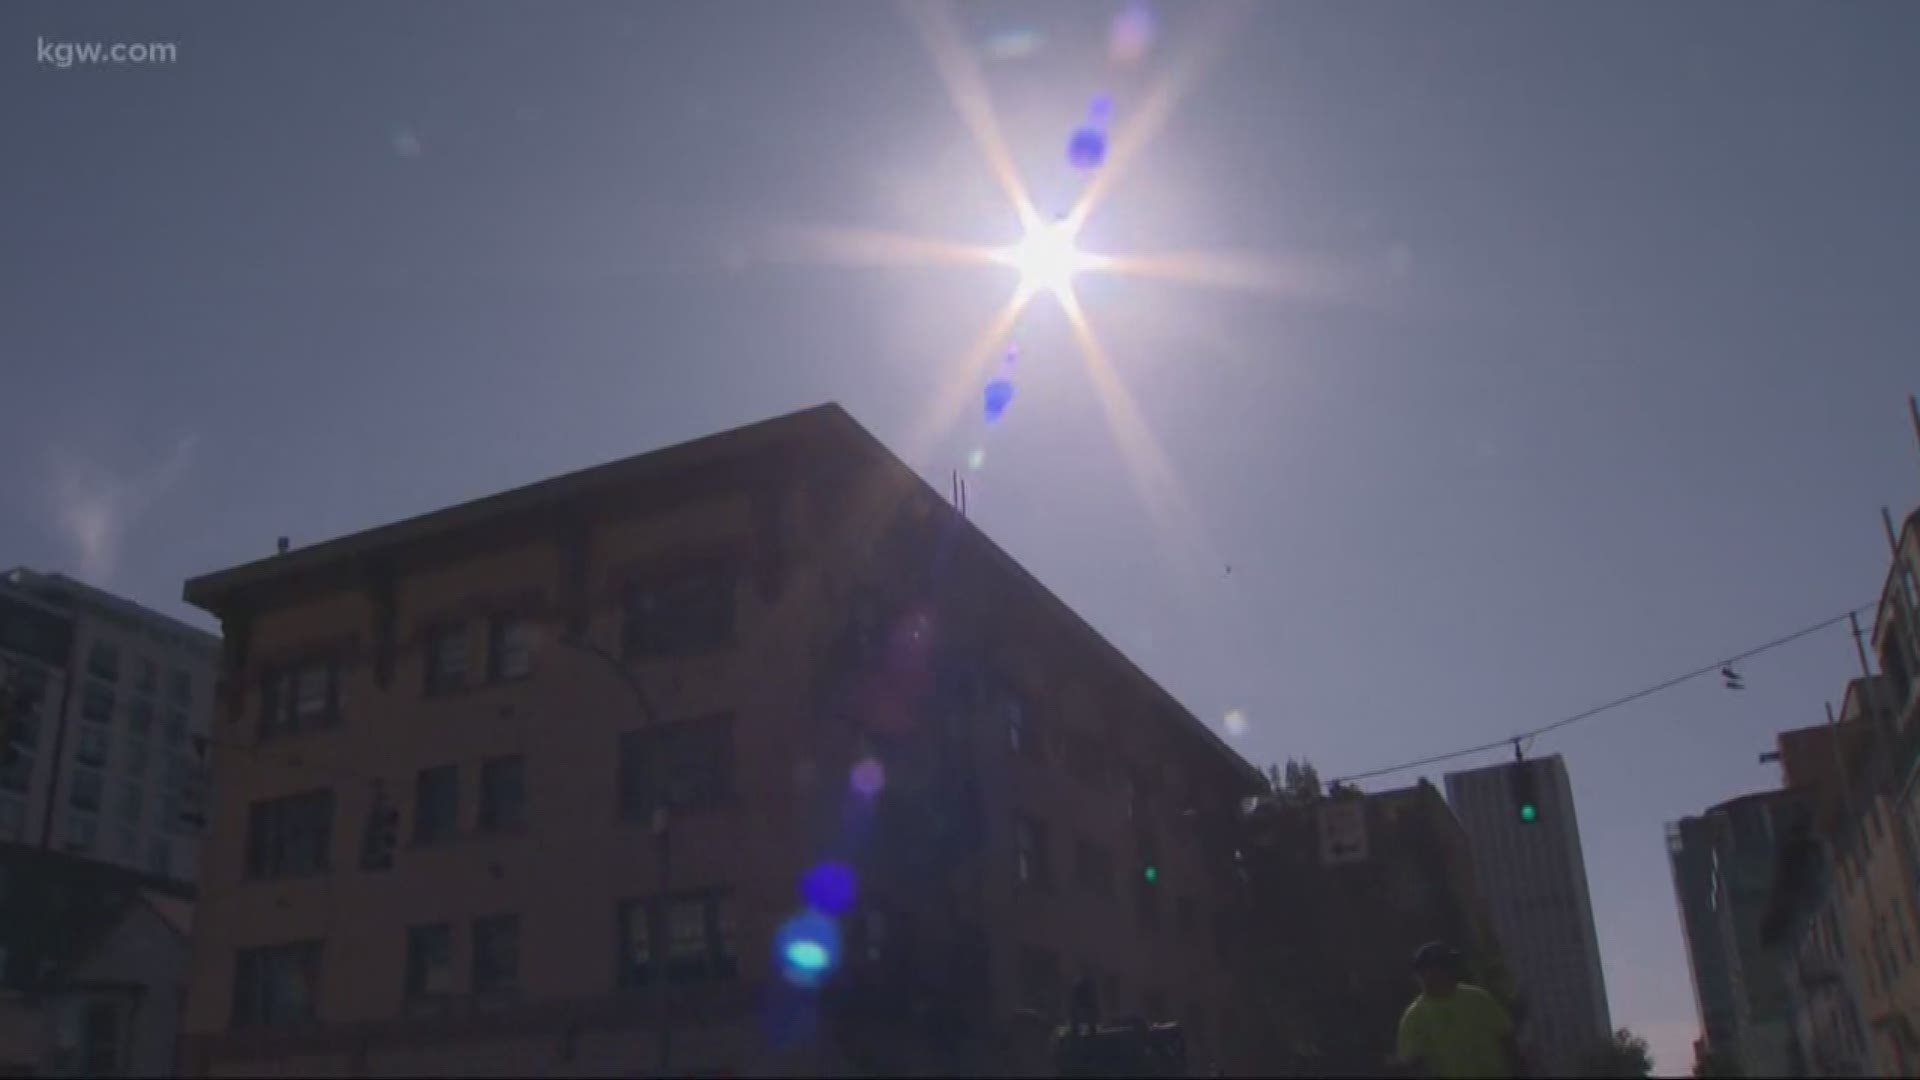 Portlanders are looking for creative ways to beat the heat as temps in the upper 90s continue for another day.